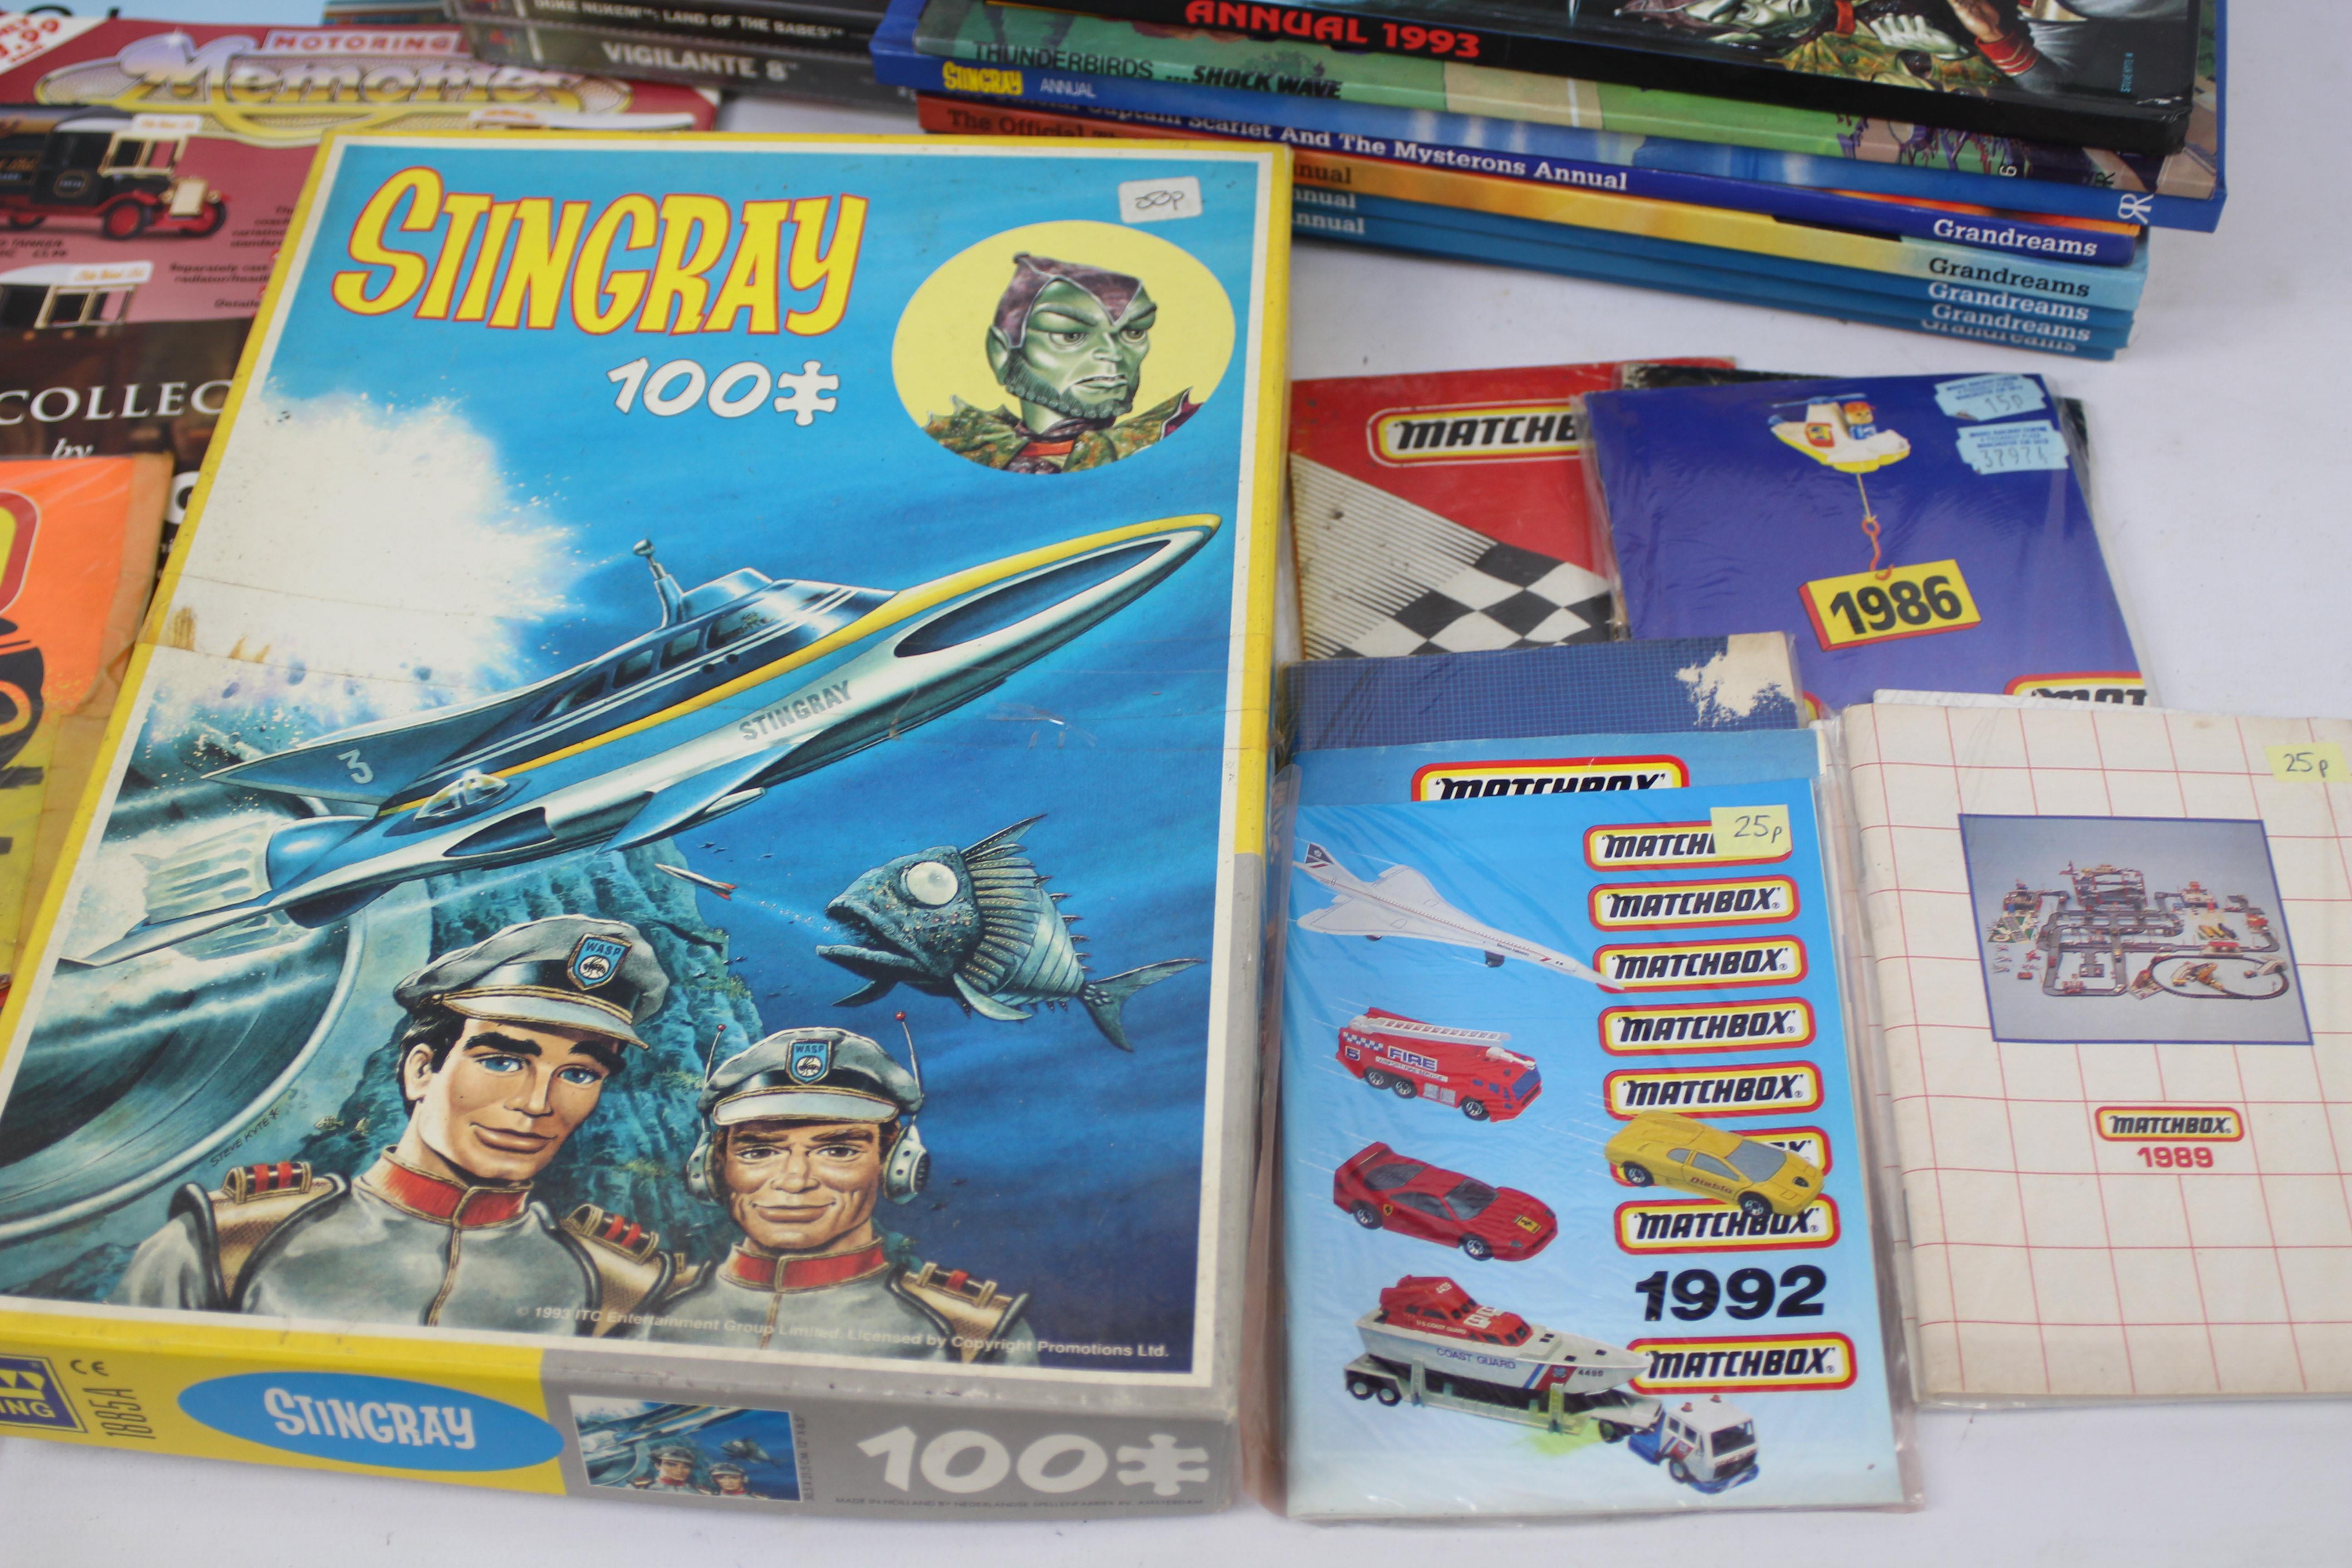 Thunderbirds - Stingray - Matchbox. A collection of Thunderbirds Annuals, comics and art. - Image 4 of 4